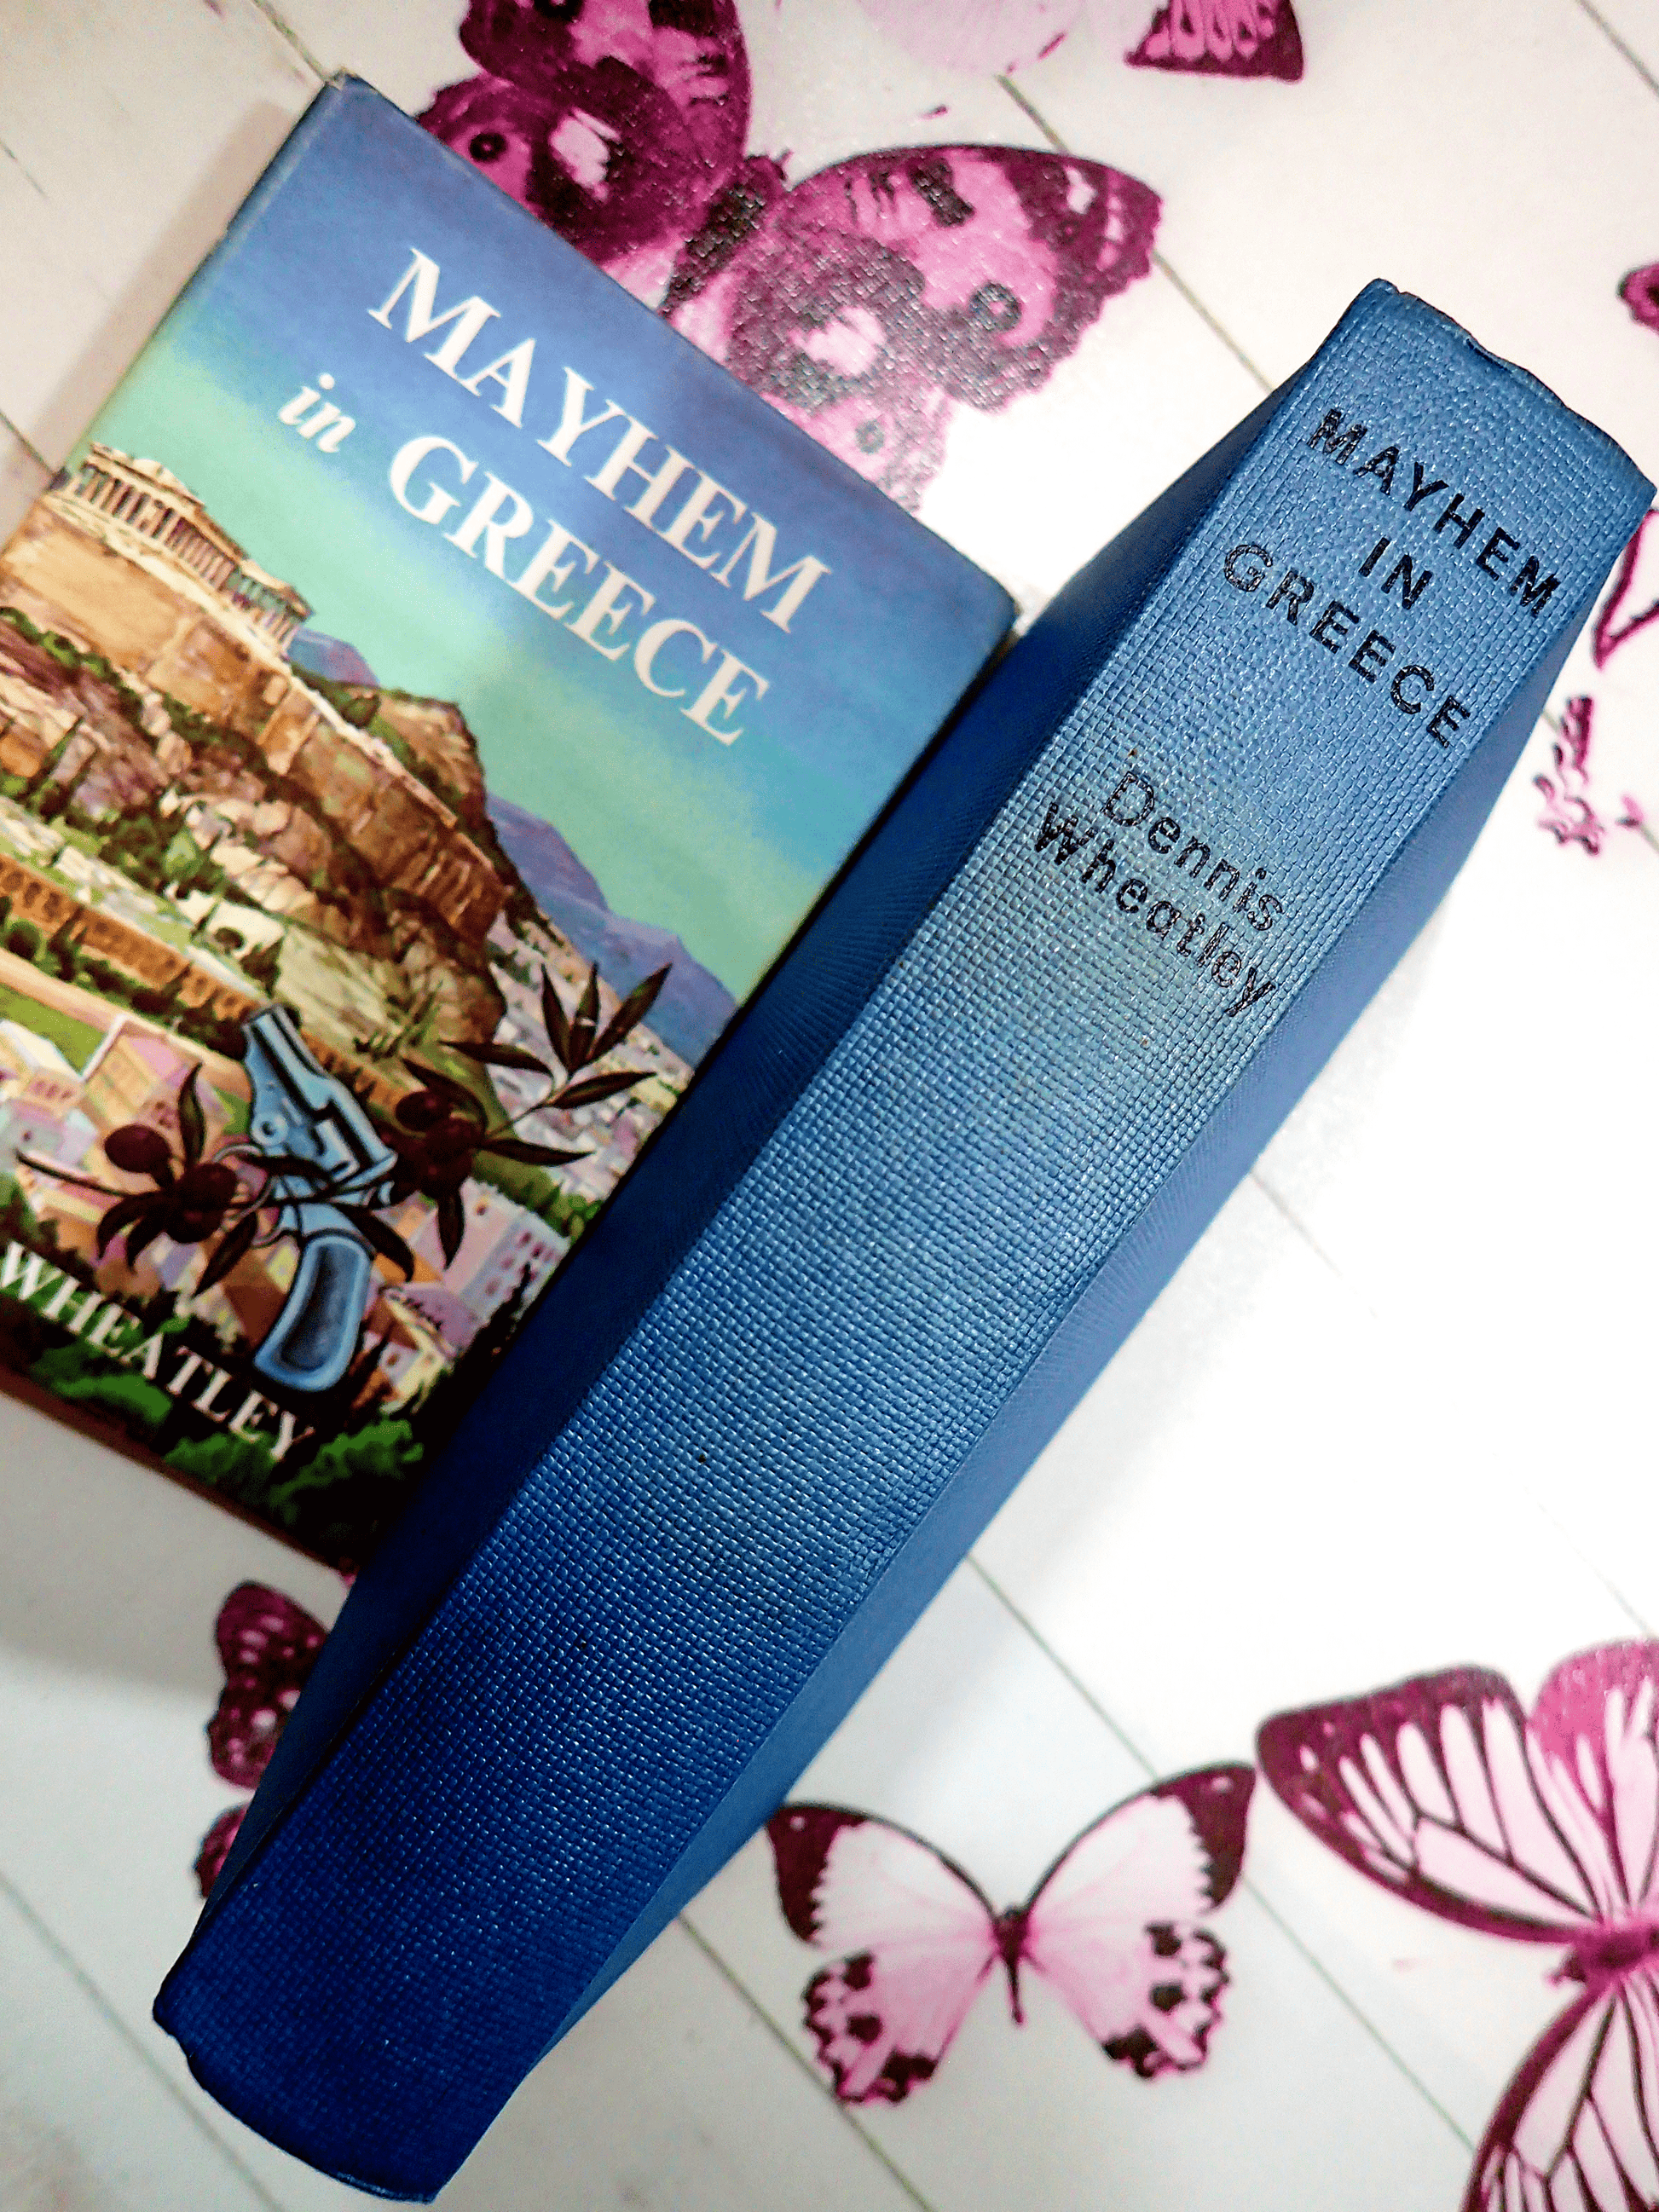 Blue boards of Mayhem in Greece Dennis Wheatley Vintage Book BCA with Black titles to the spine.